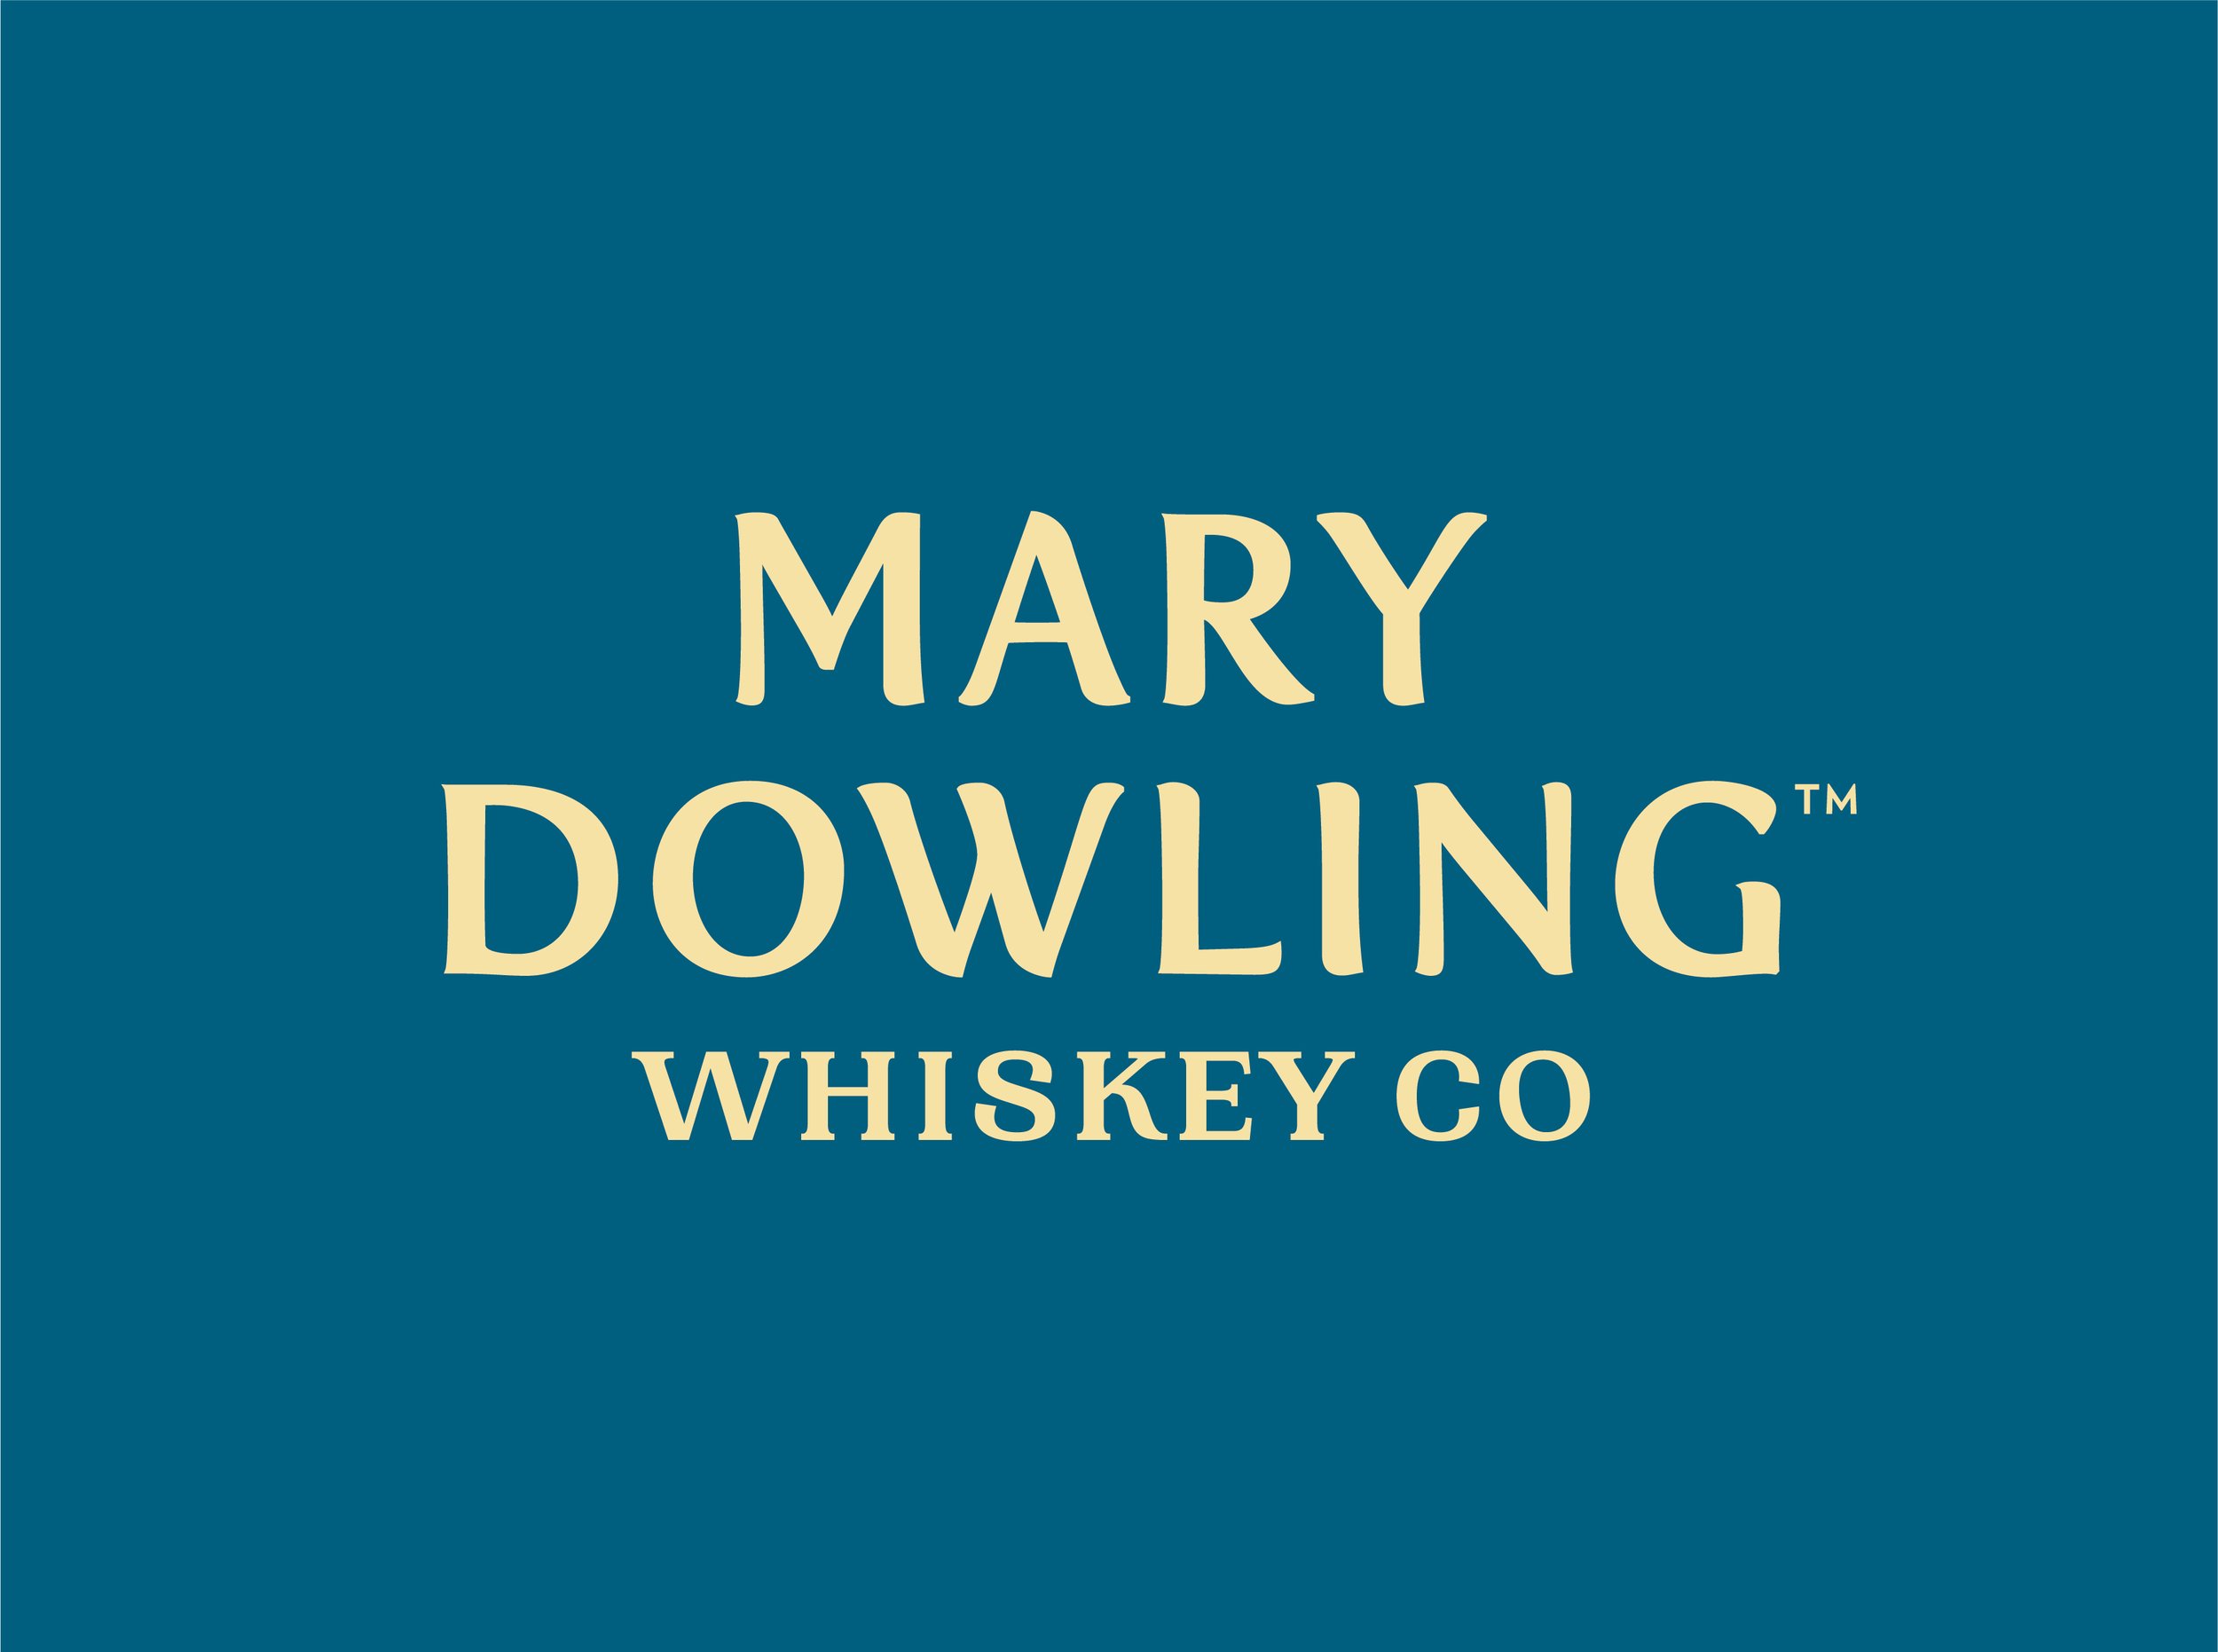 Mary Dowling Whiskey Co Primary Logo PMS634.jpg